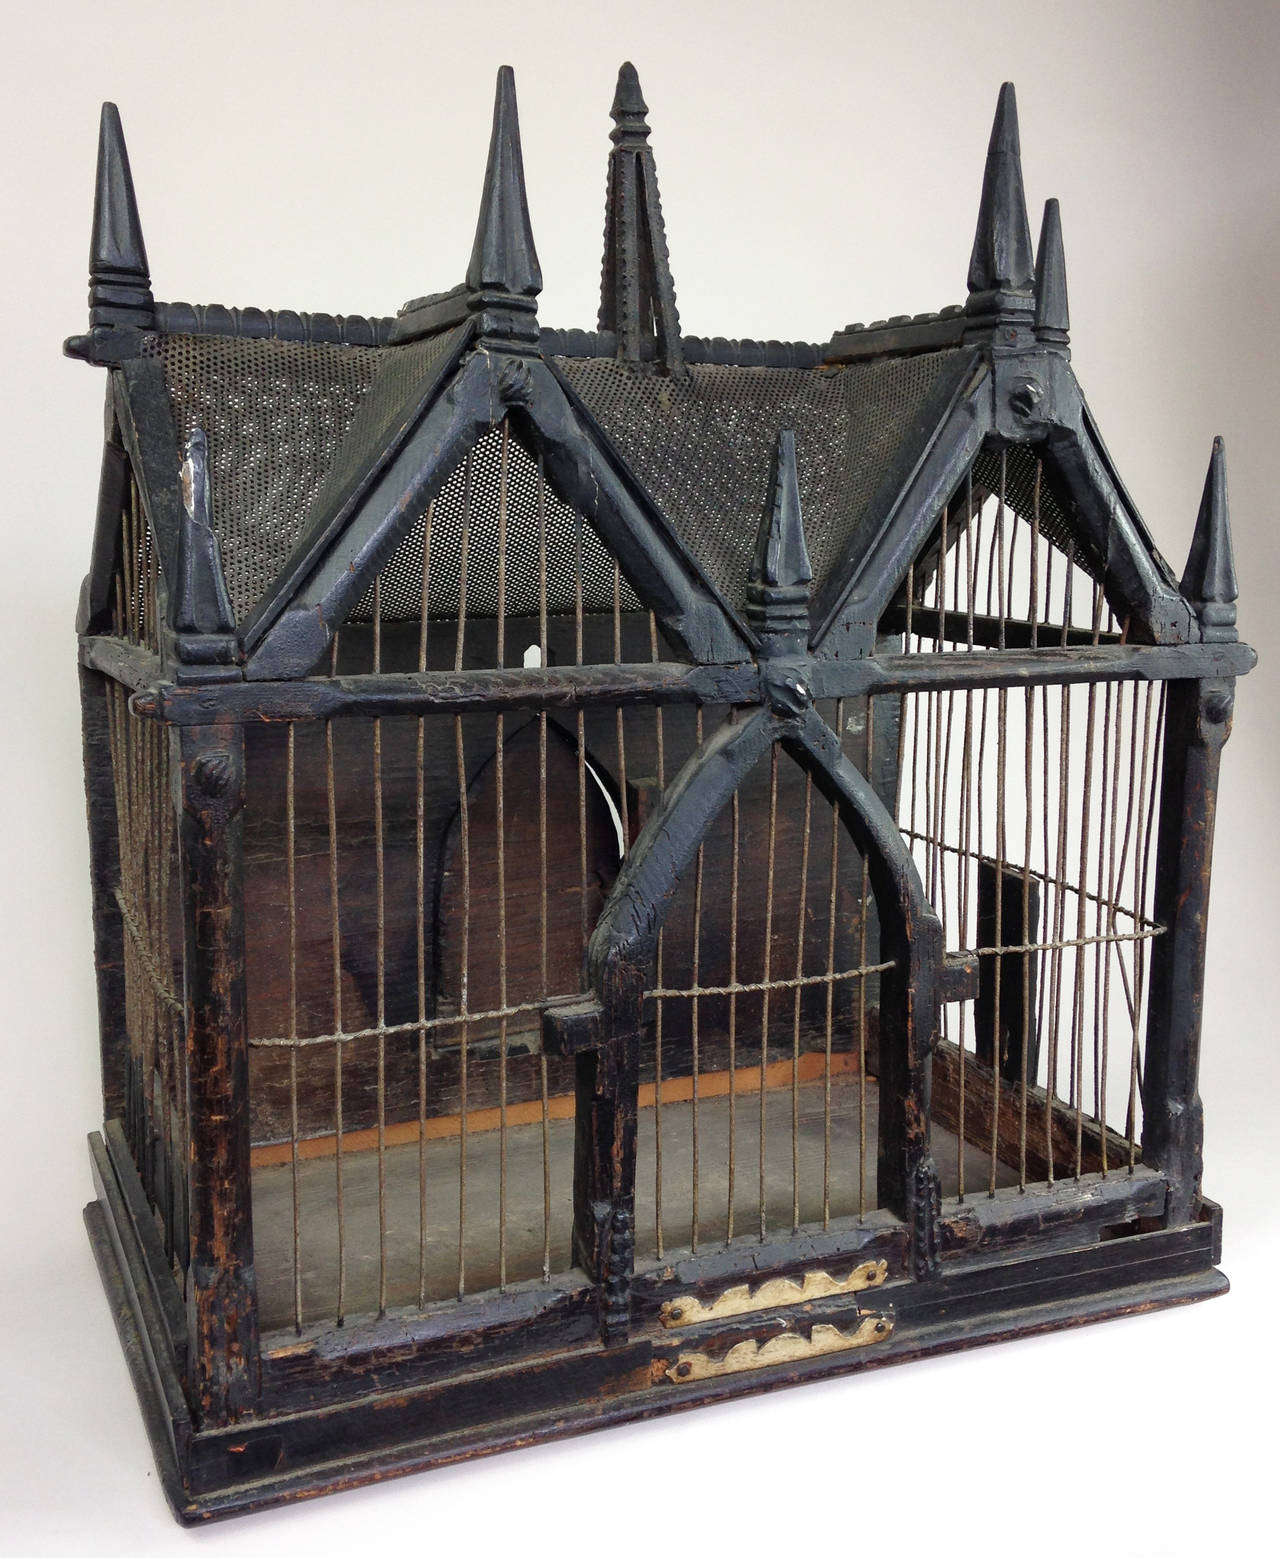 A wonderfully Gothic song bird cage of wood and metal. 

Beautifully made and dating from the mid-late 19th century. Some wear and minor loss but this only adds to the charm.